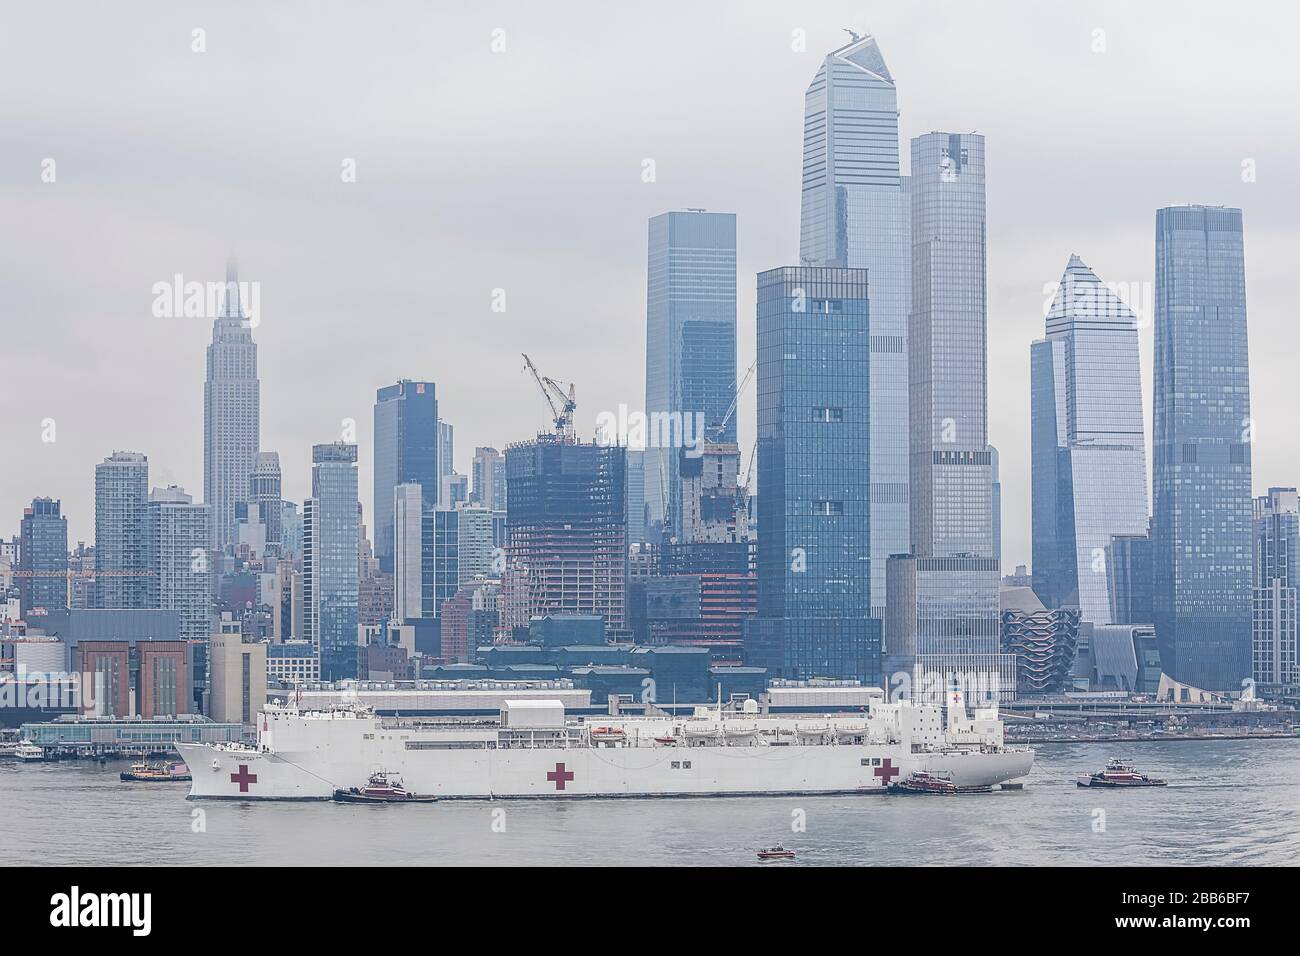 USNS Comfort NYC - Mother nature added to the somber mood as the US Naval Hospital Ship Comfort  arrives in Manhattan in New York City. Seen here the Stock Photo